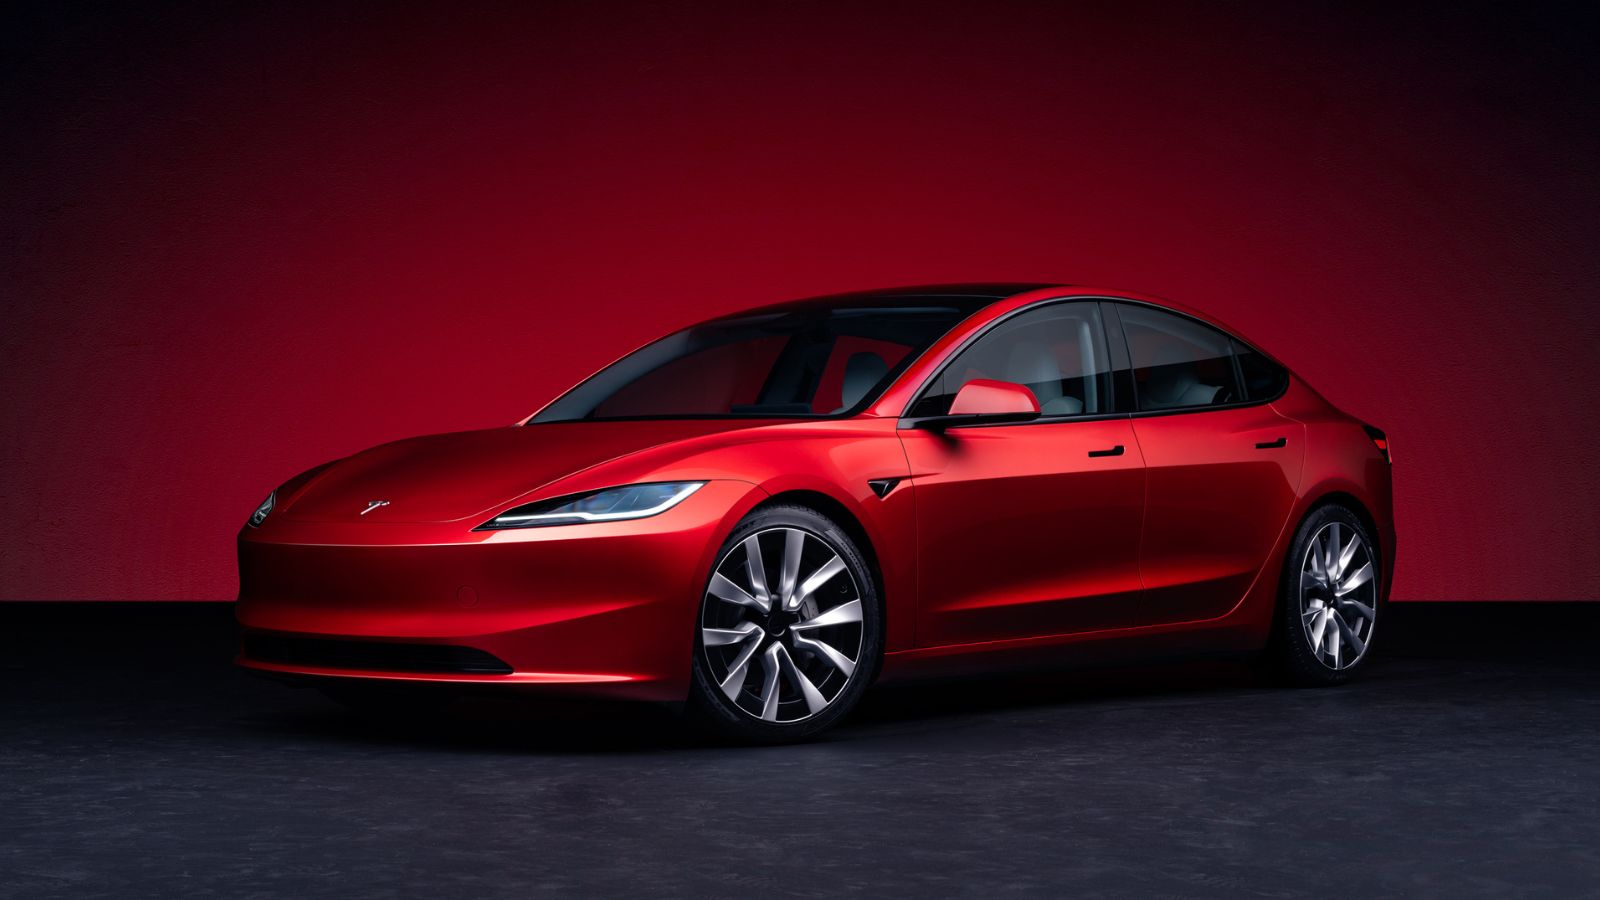 Tesla Introduced the All-New Model 3 (Highland): Here's Everything